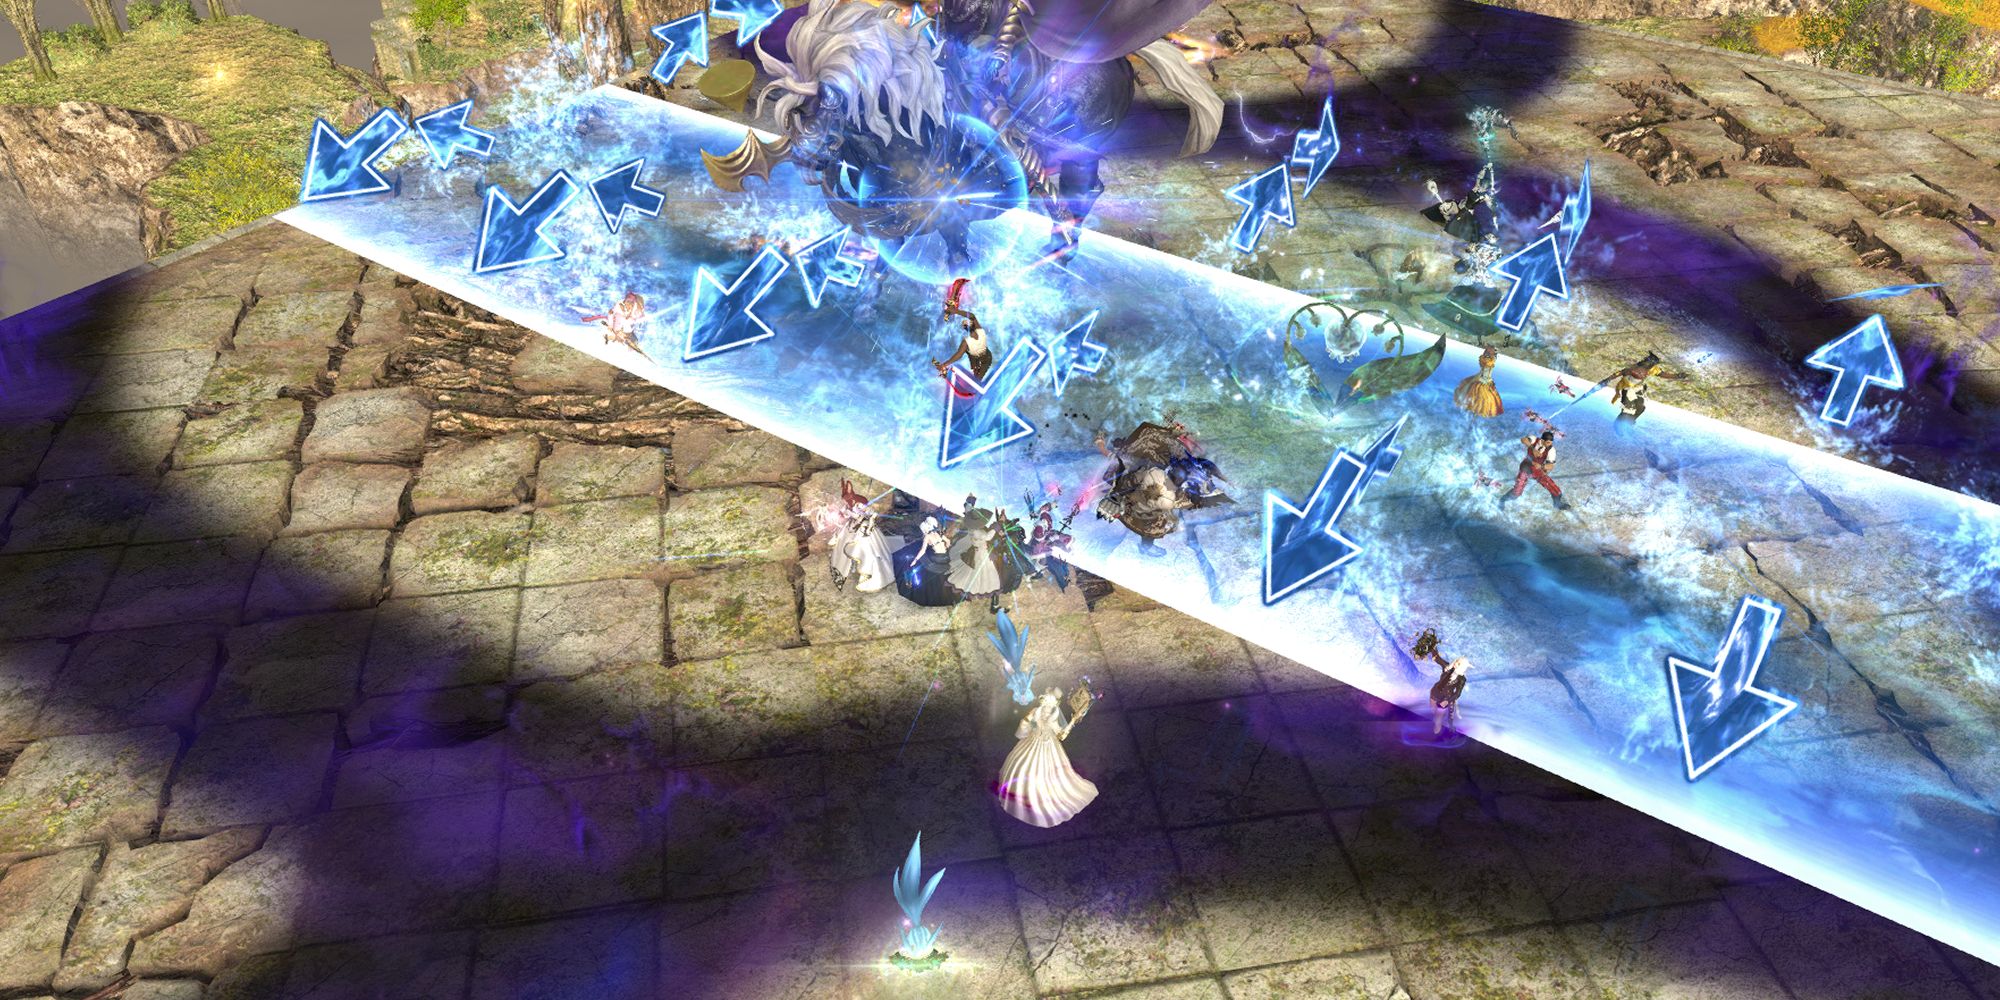 An image of the boss fight Althyk and Nymeia from Final Fantasy 14's raid, Euphrosyne. This image demonstrates Hydrorythmos, an attack which sees a wave of water sweep across the arena.